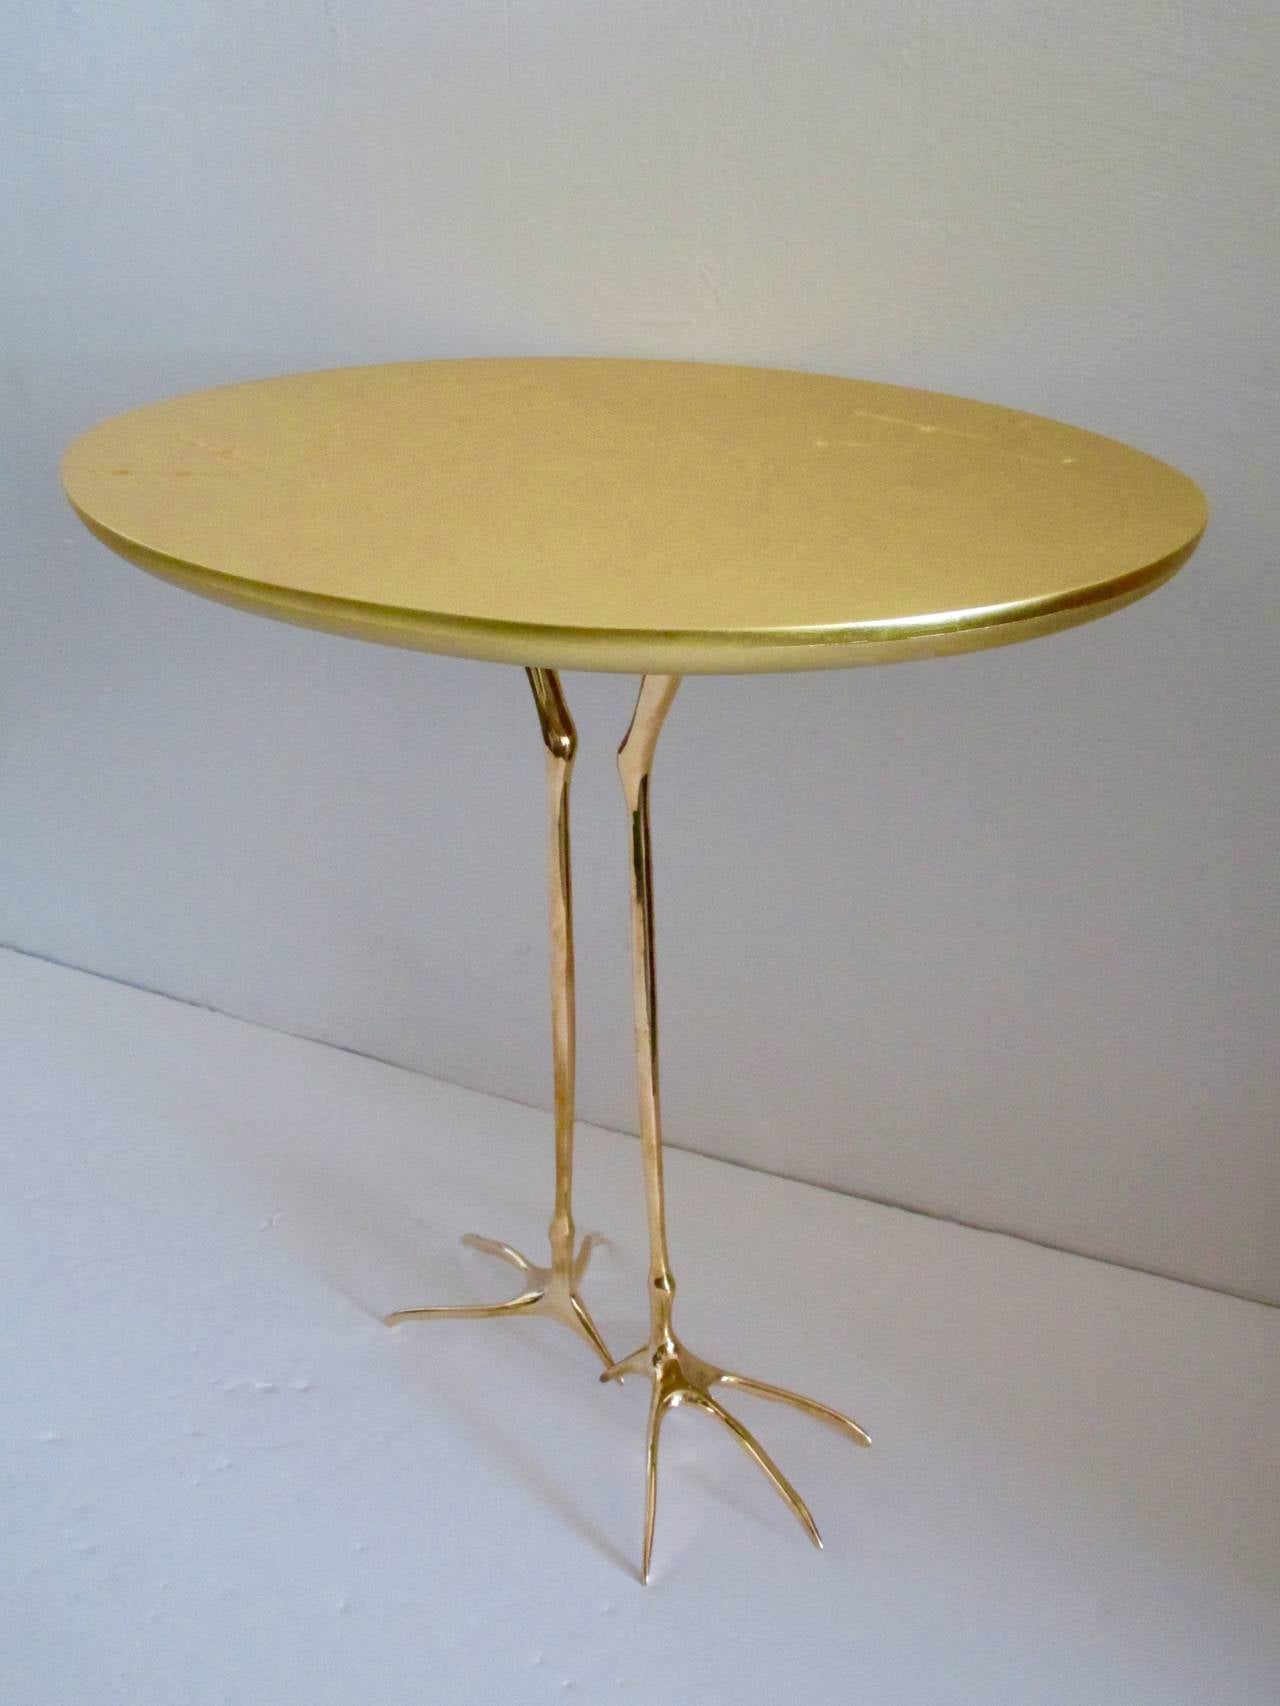 Surrealist table by Méret Oppenheim with polished cast bronze.
Bird's legs and top in 24-carat gold leaf.